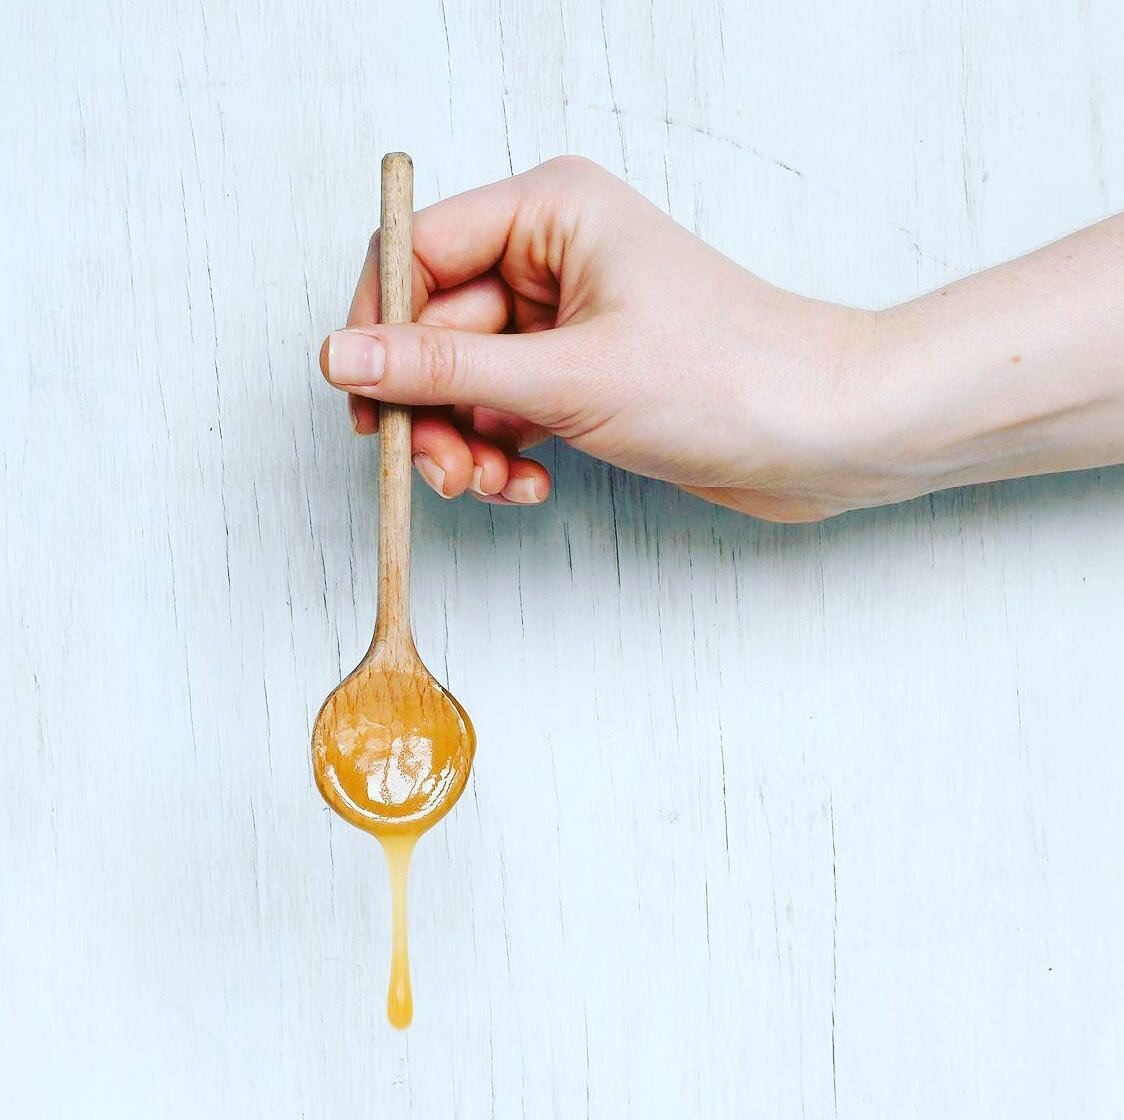 Looking for a way to detox and reset? Start your day with a cup of warm water with 1/2 a fresh squeezed lemon and 1 tablespoon of Manuka 🍯 before food.  Manuka honey is a type of honey native to New Zealand that is produced by bees who pollinate the